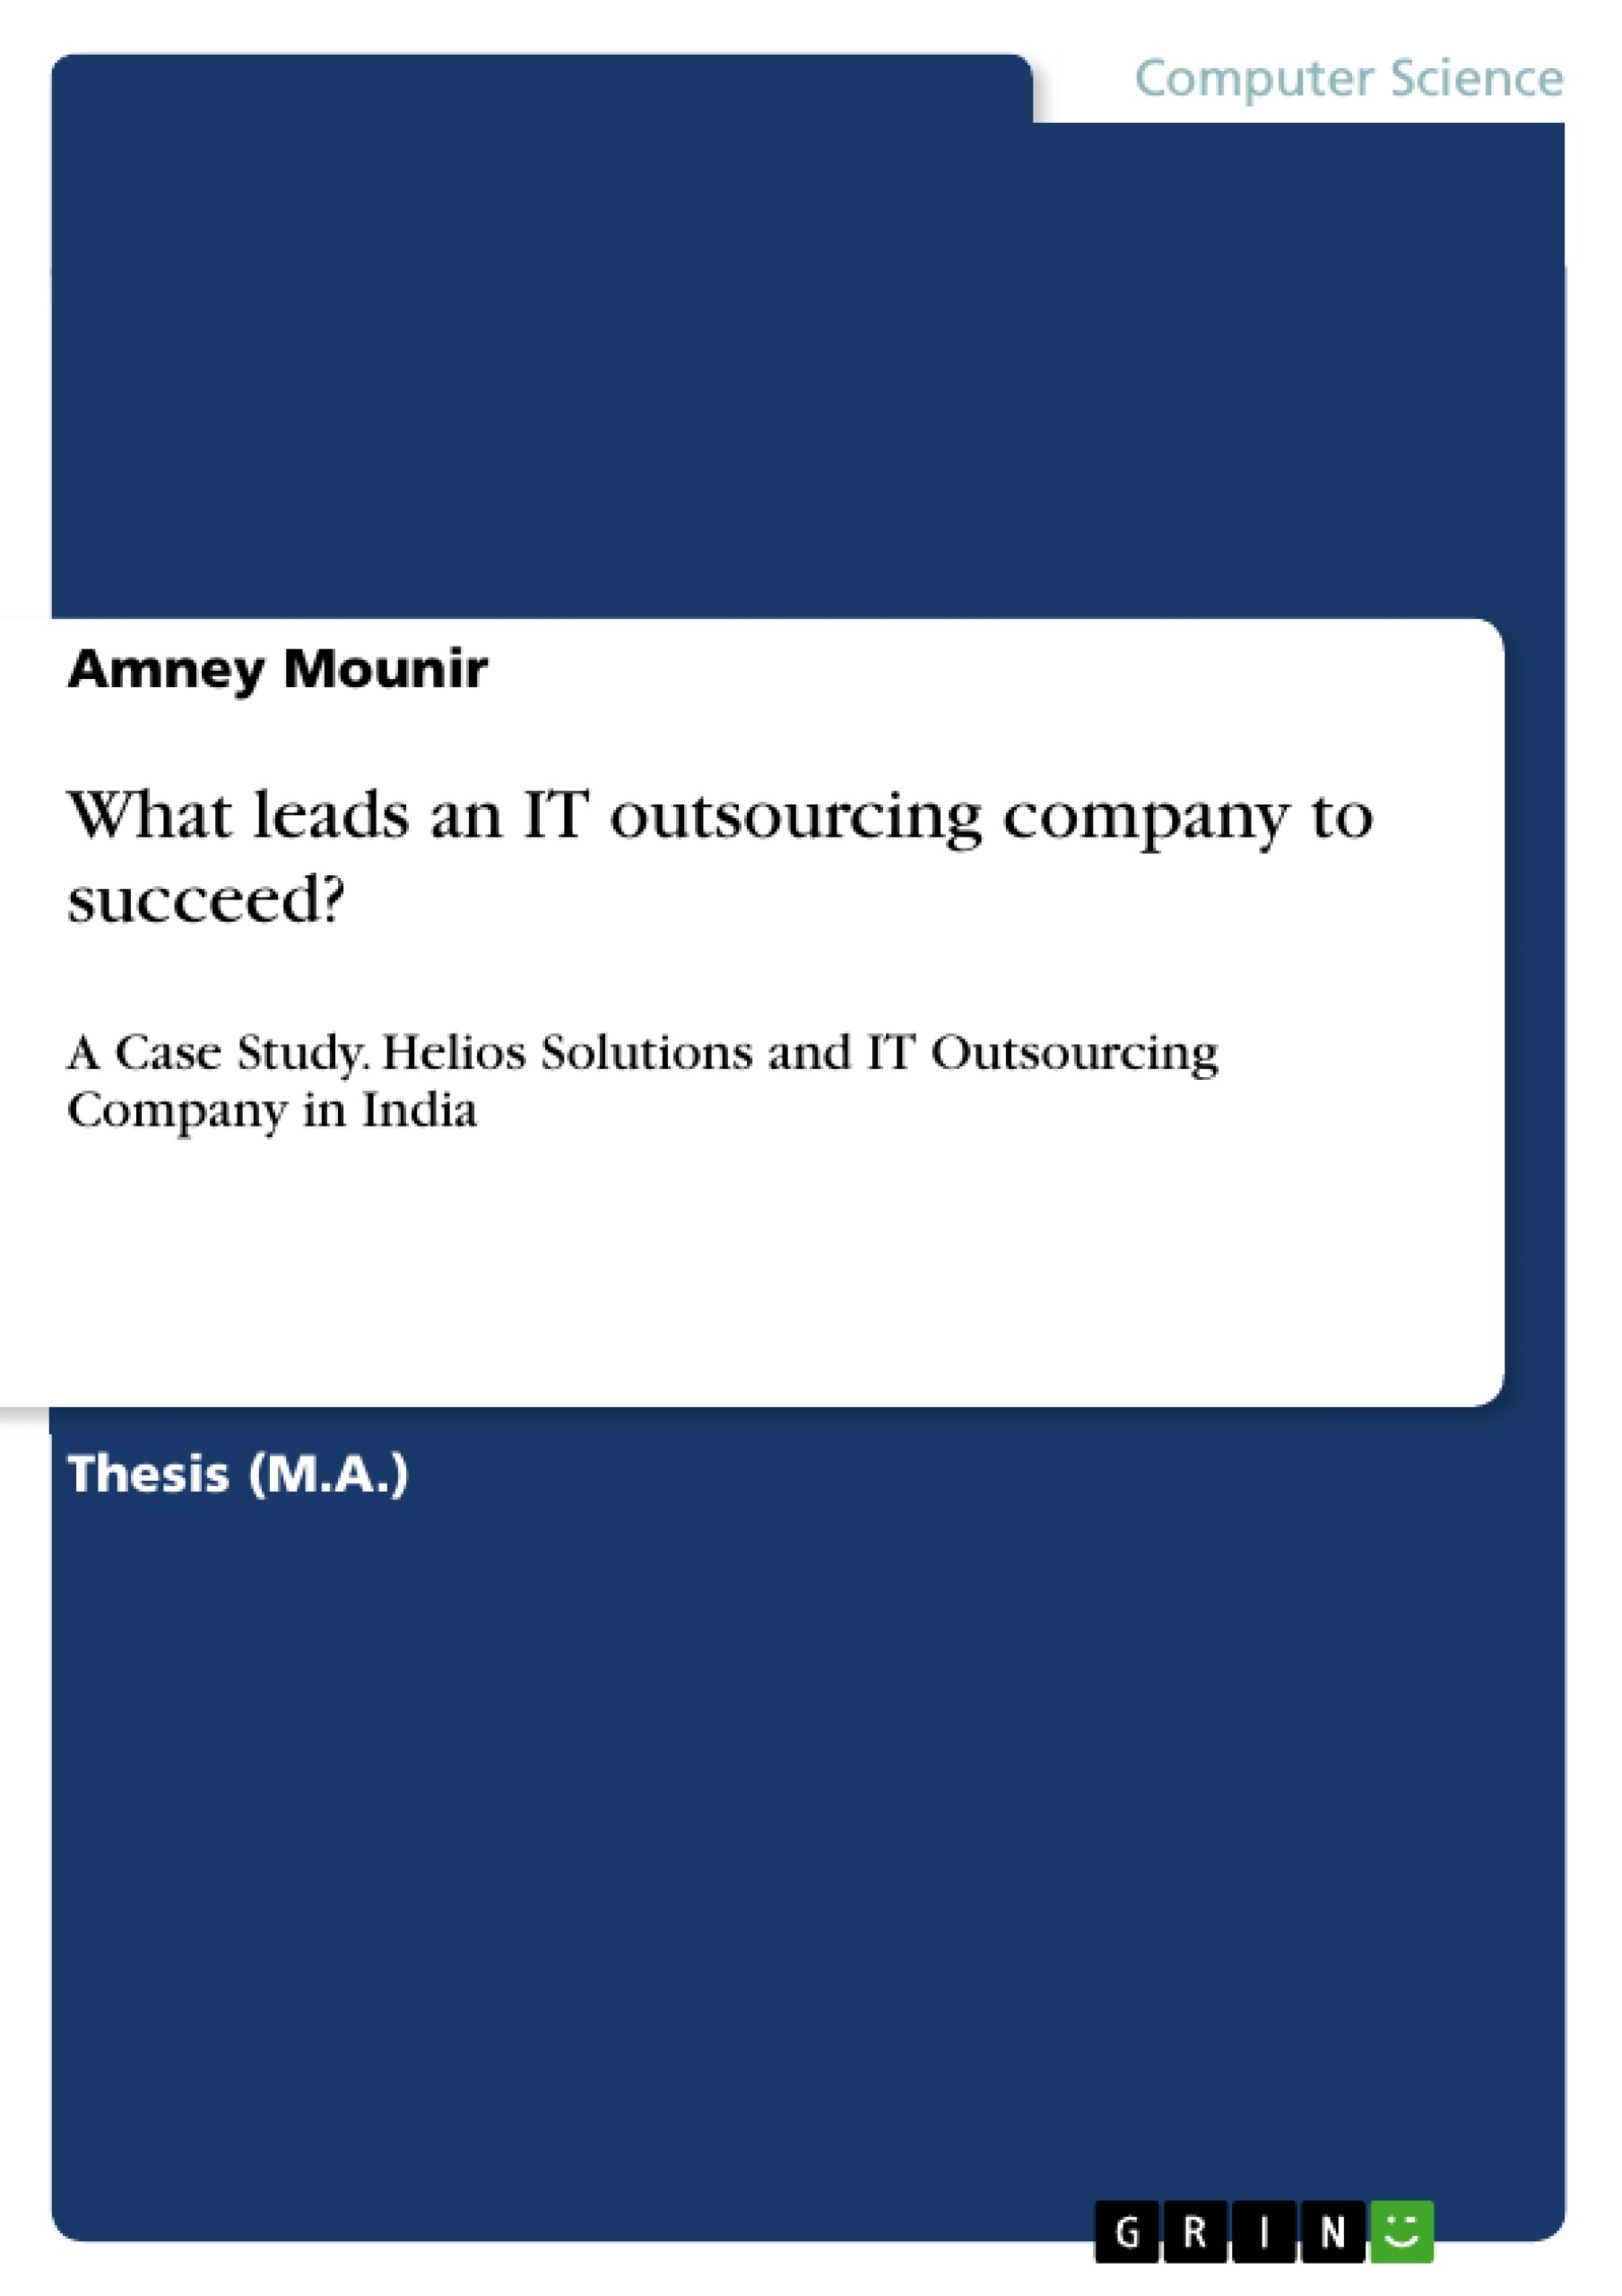 Title: What leads an IT outsourcing company to succeed?